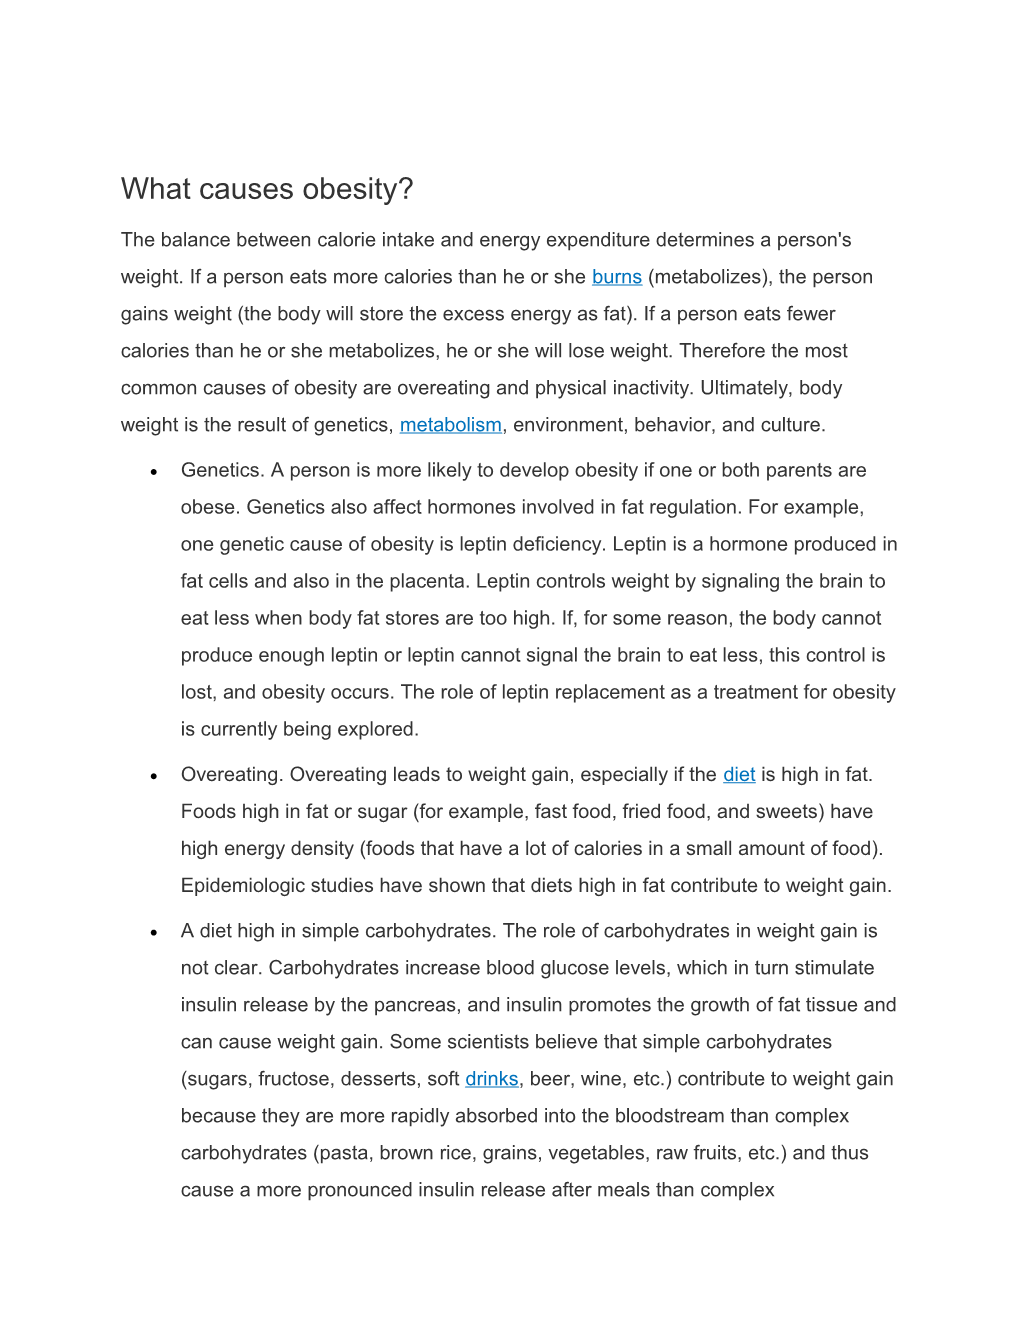 What Causes Obesity?